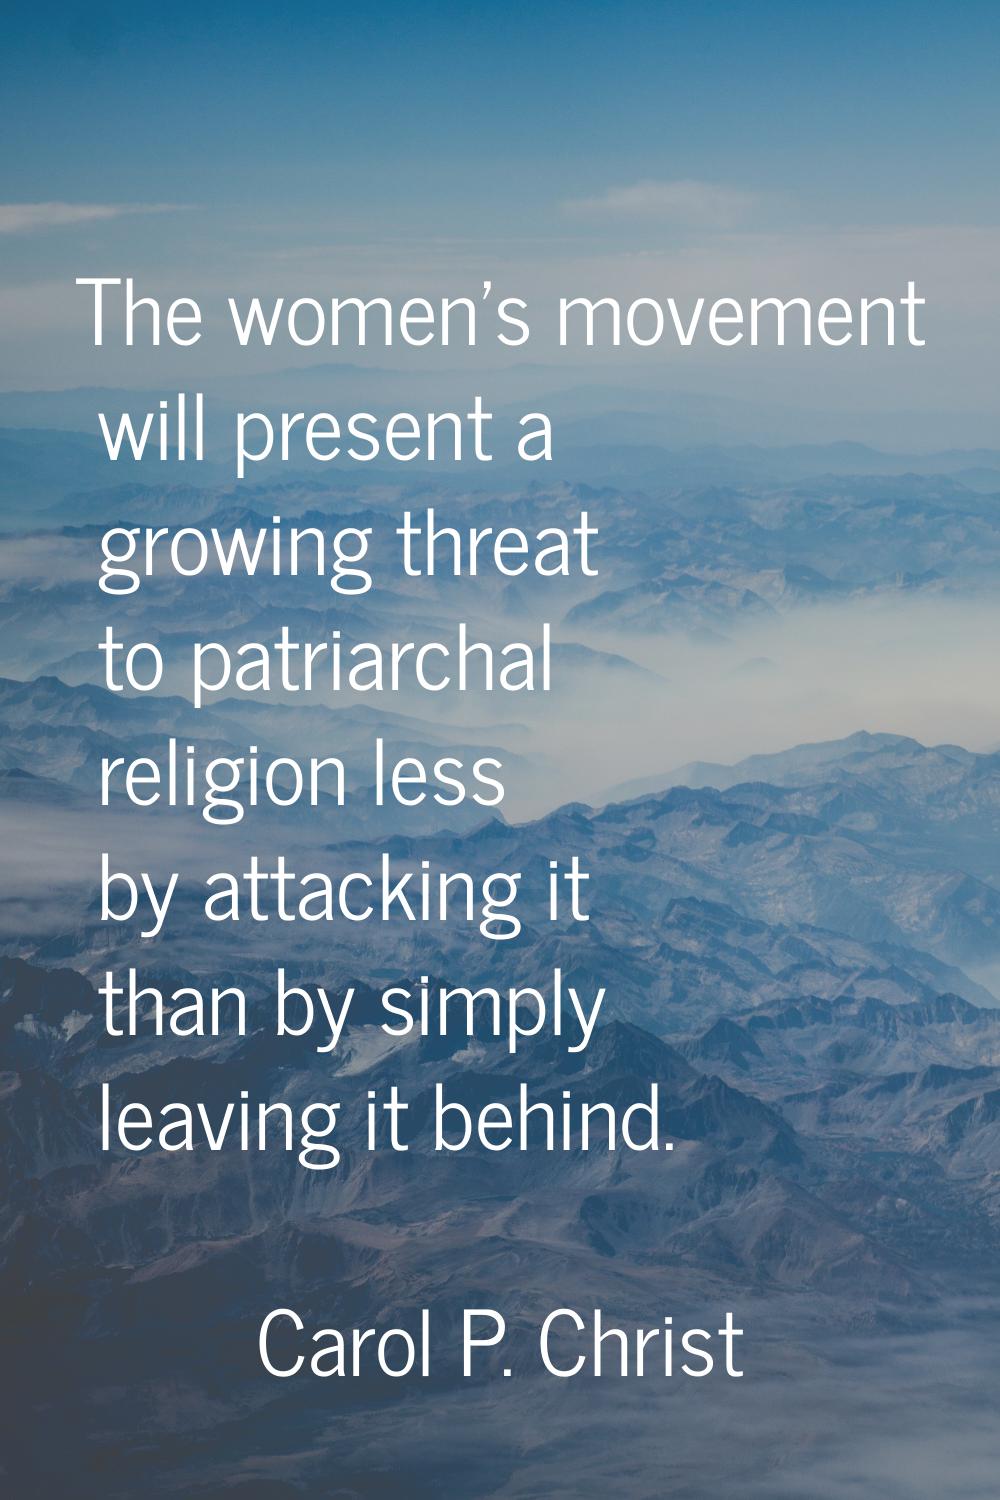 The women's movement will present a growing threat to patriarchal religion less by attacking it tha